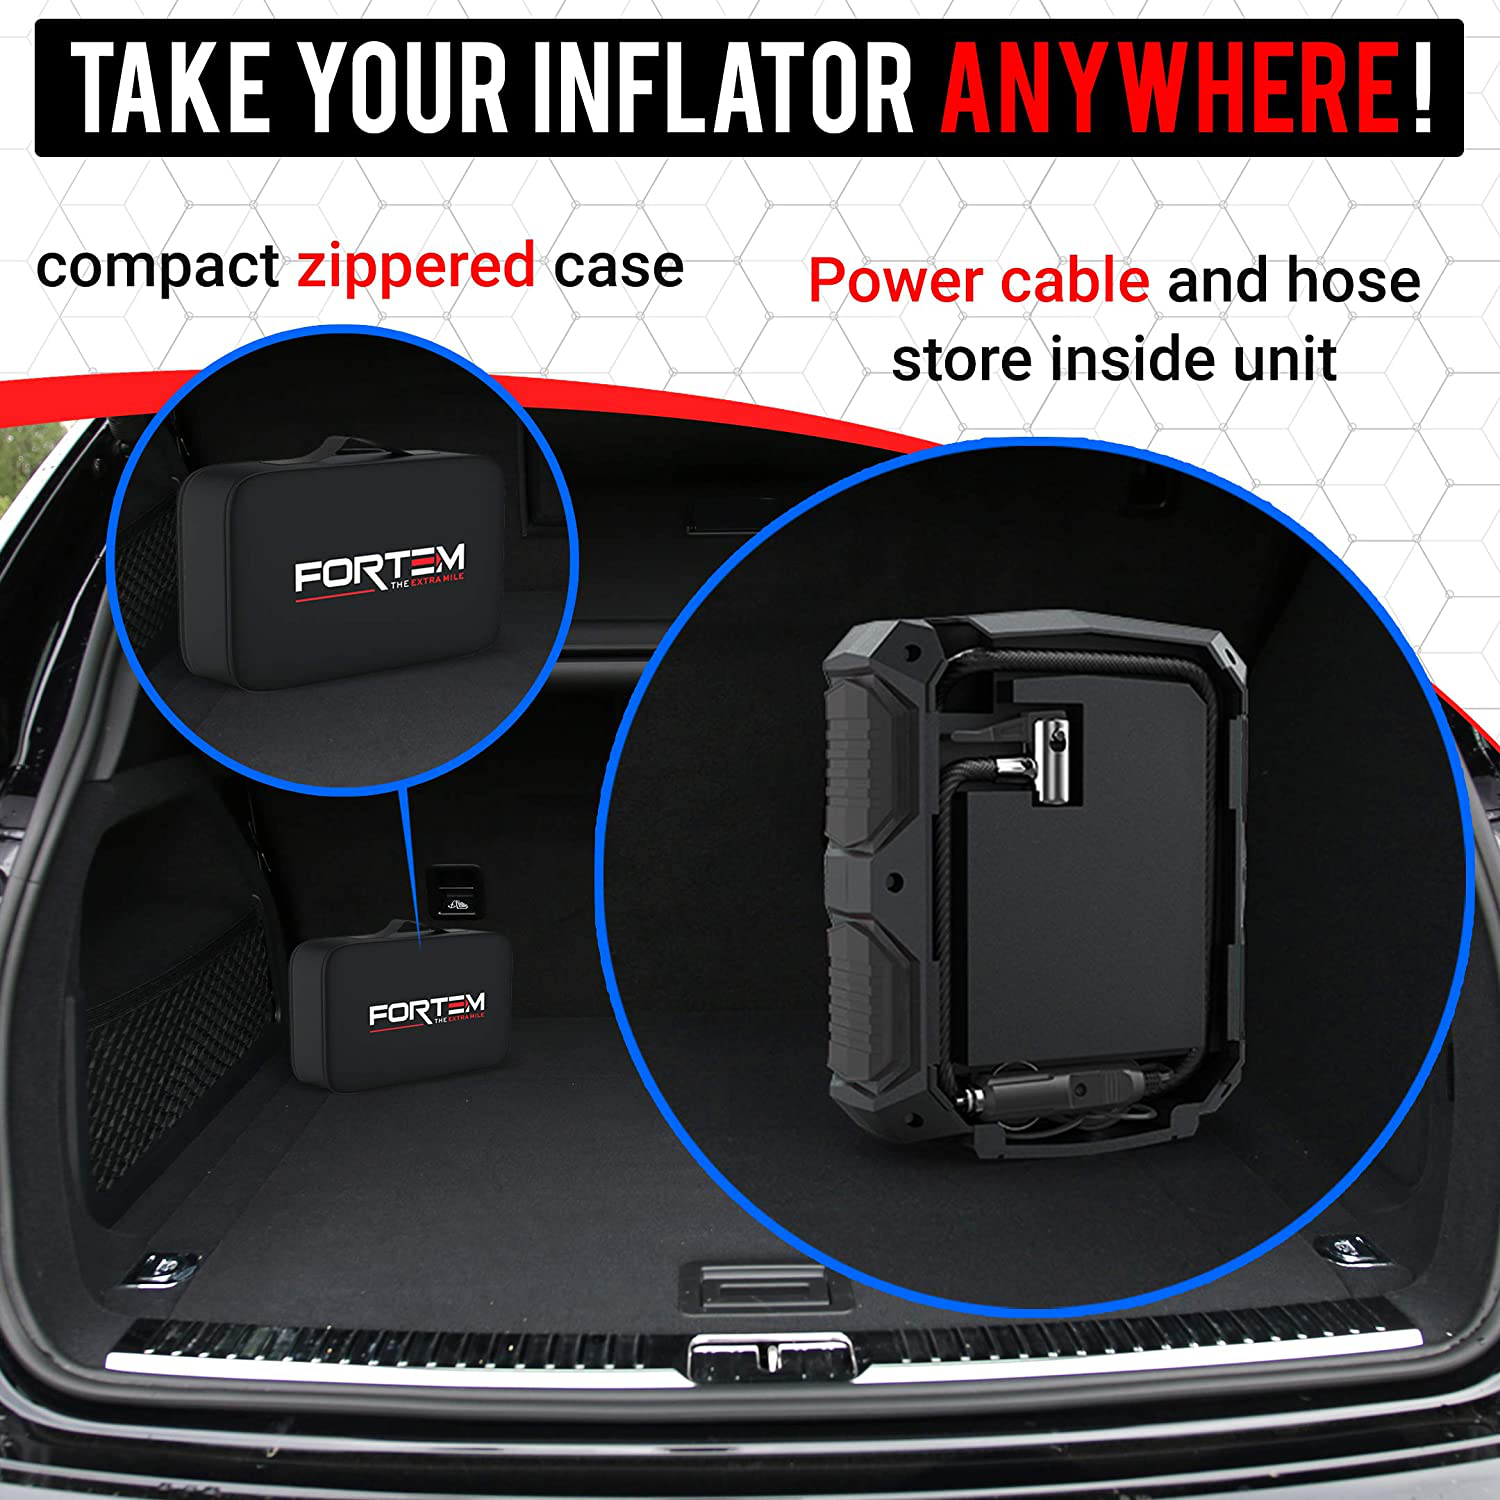 FORTEM Digital Tire Inflator for Car w/Auto Pump/Shut Off Feature, Portable Air Compressor, Carrying Case